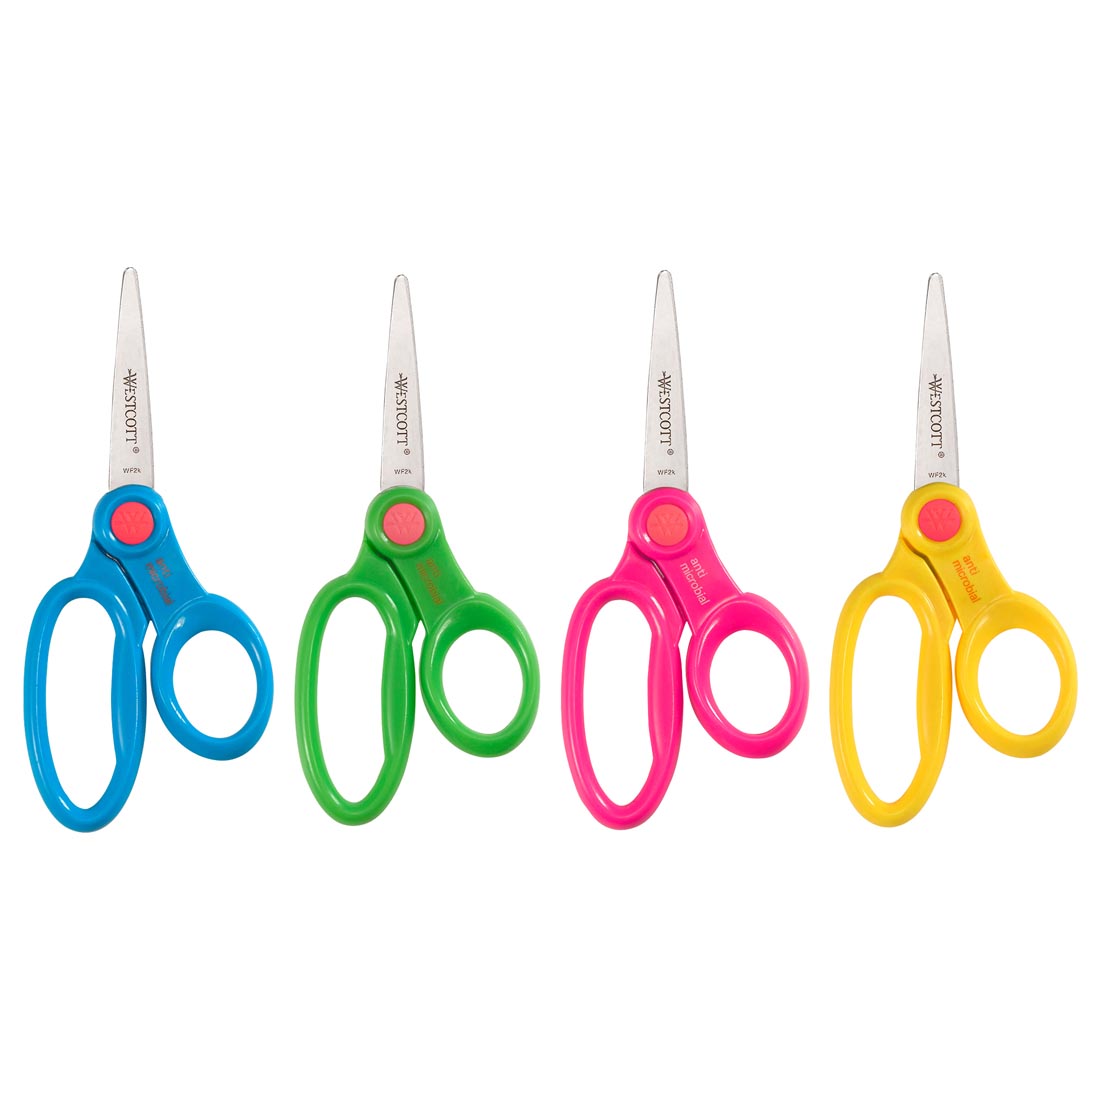 close up of kids' scissors, in 4 different colors